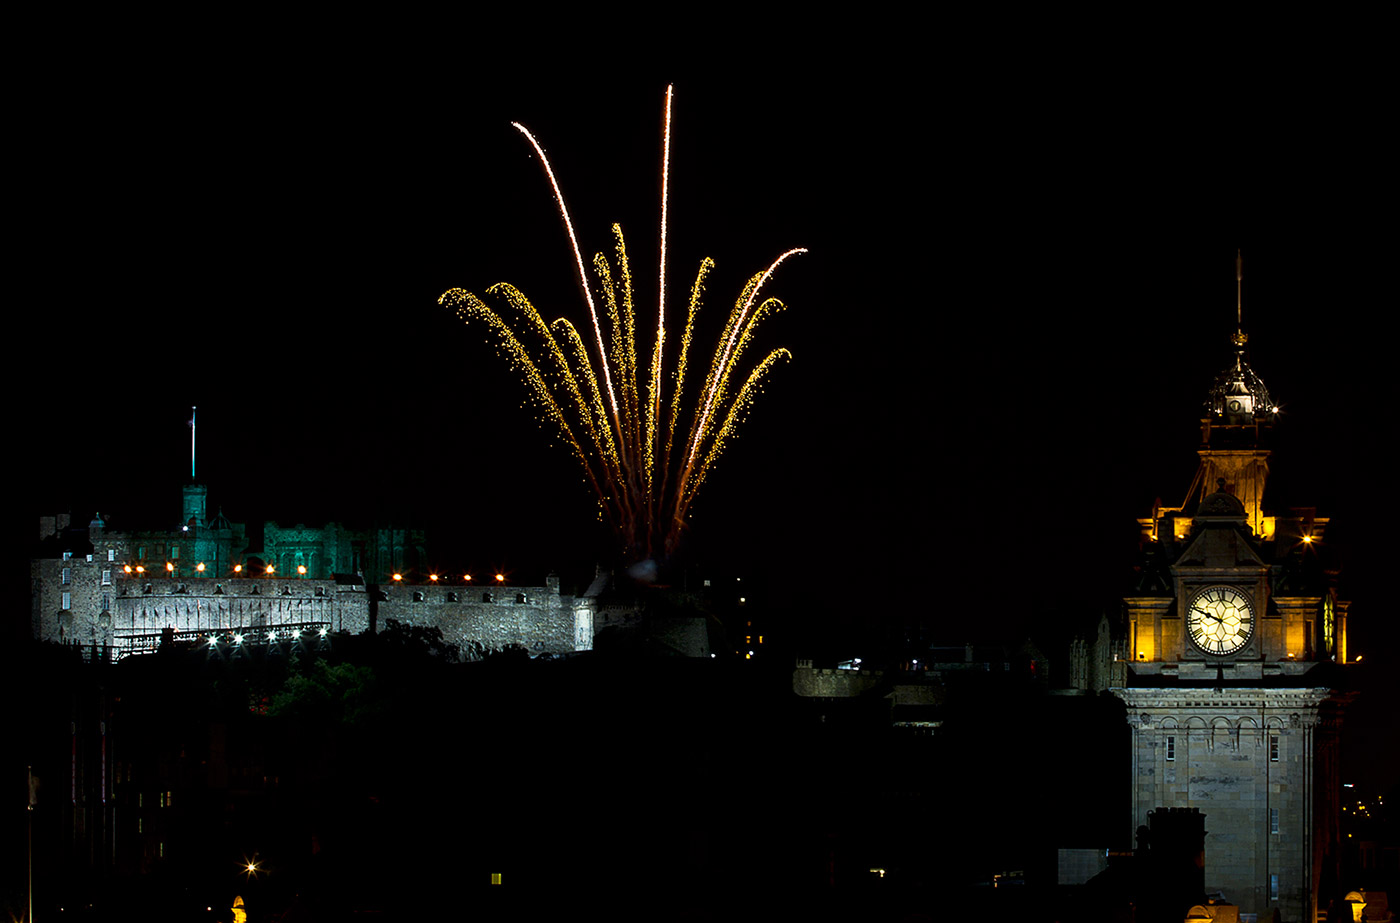 Edinburgh Tattoo from Calton Hill - this is single firework burst half eay through. Had to be ready for it.